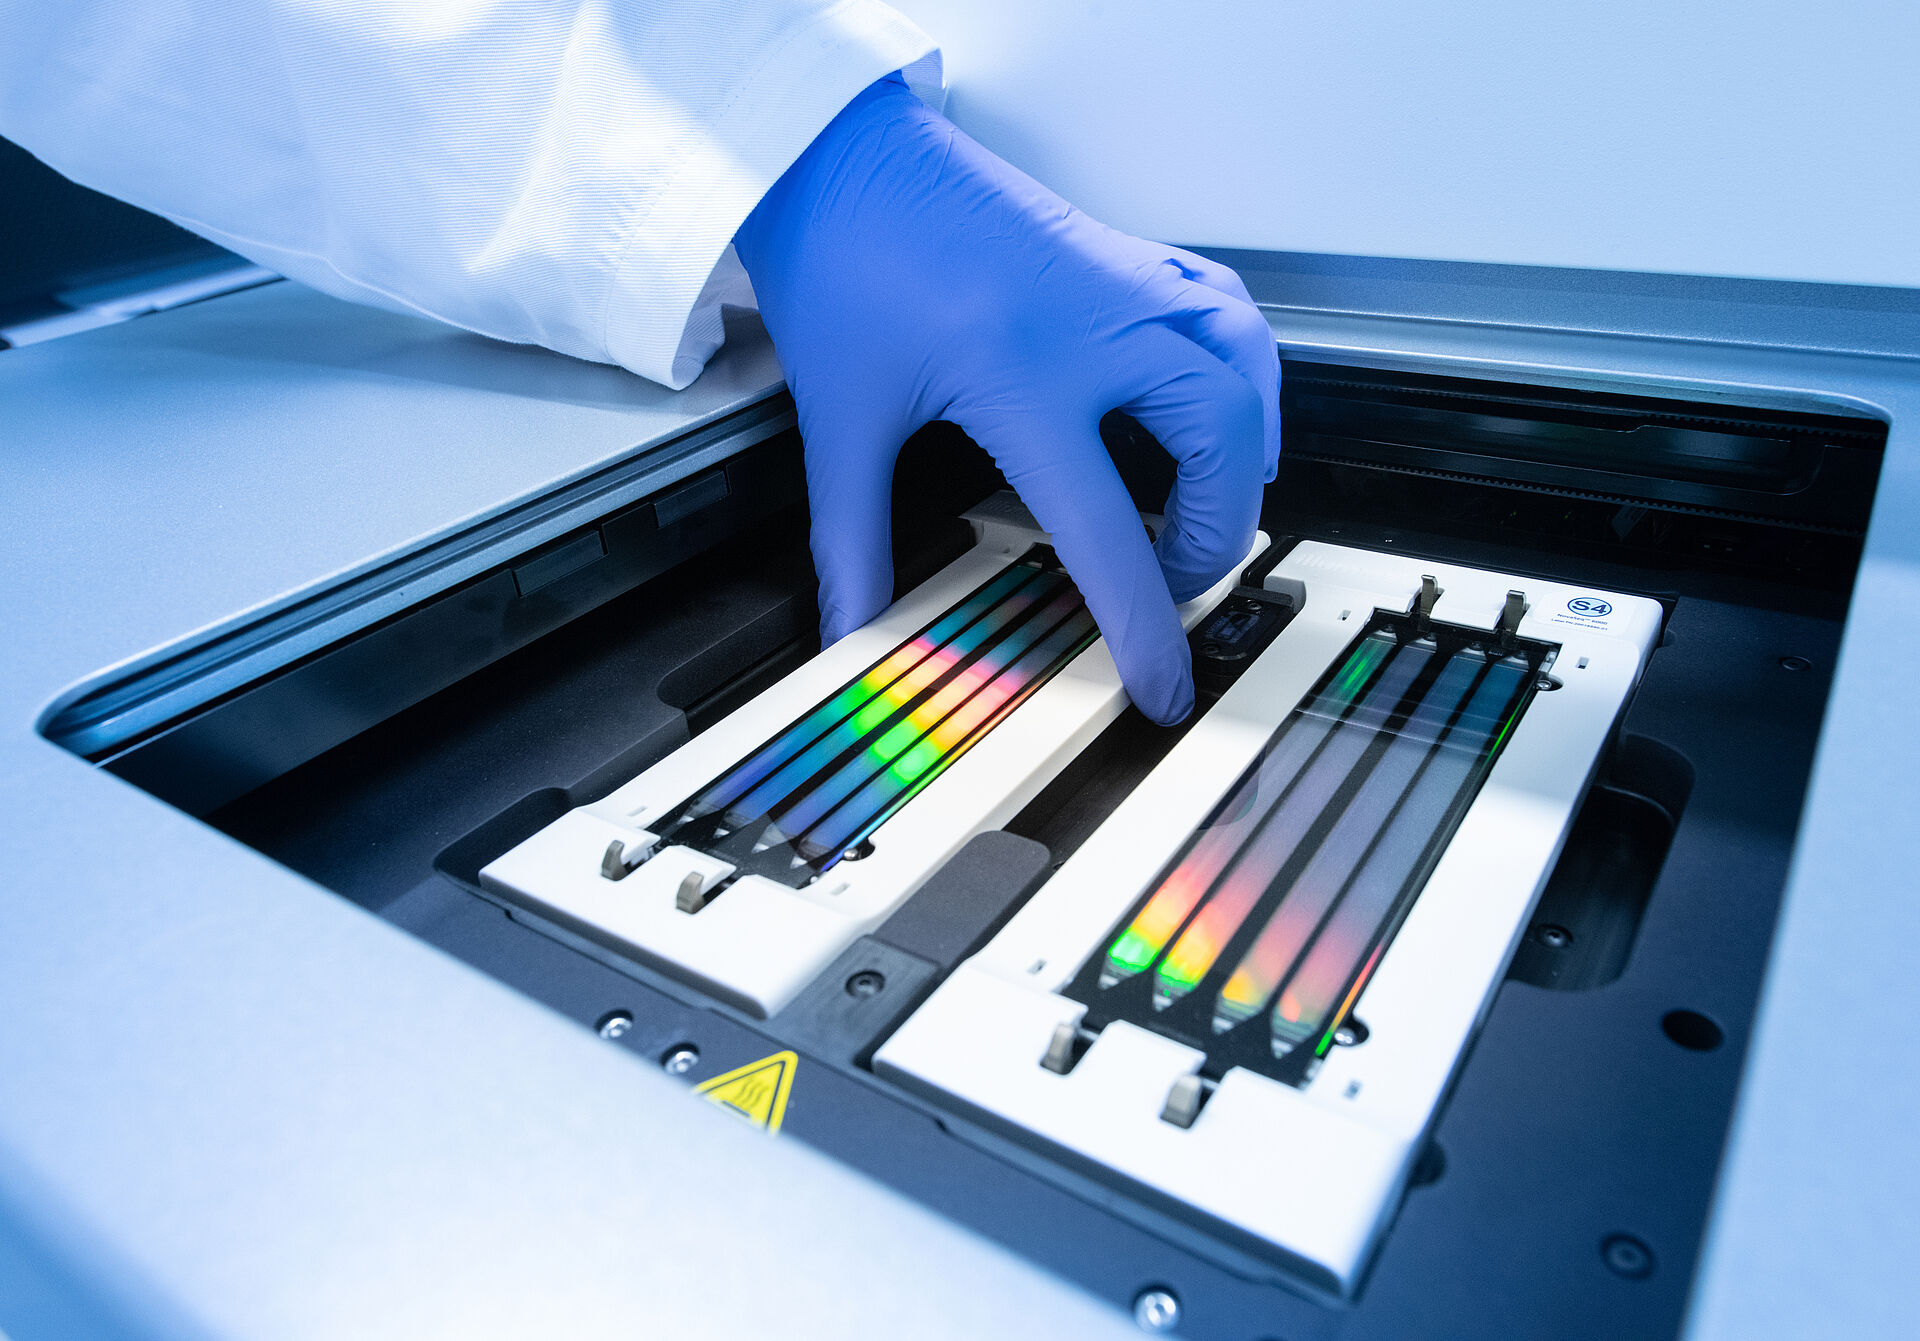 Preparations for gene sequencing